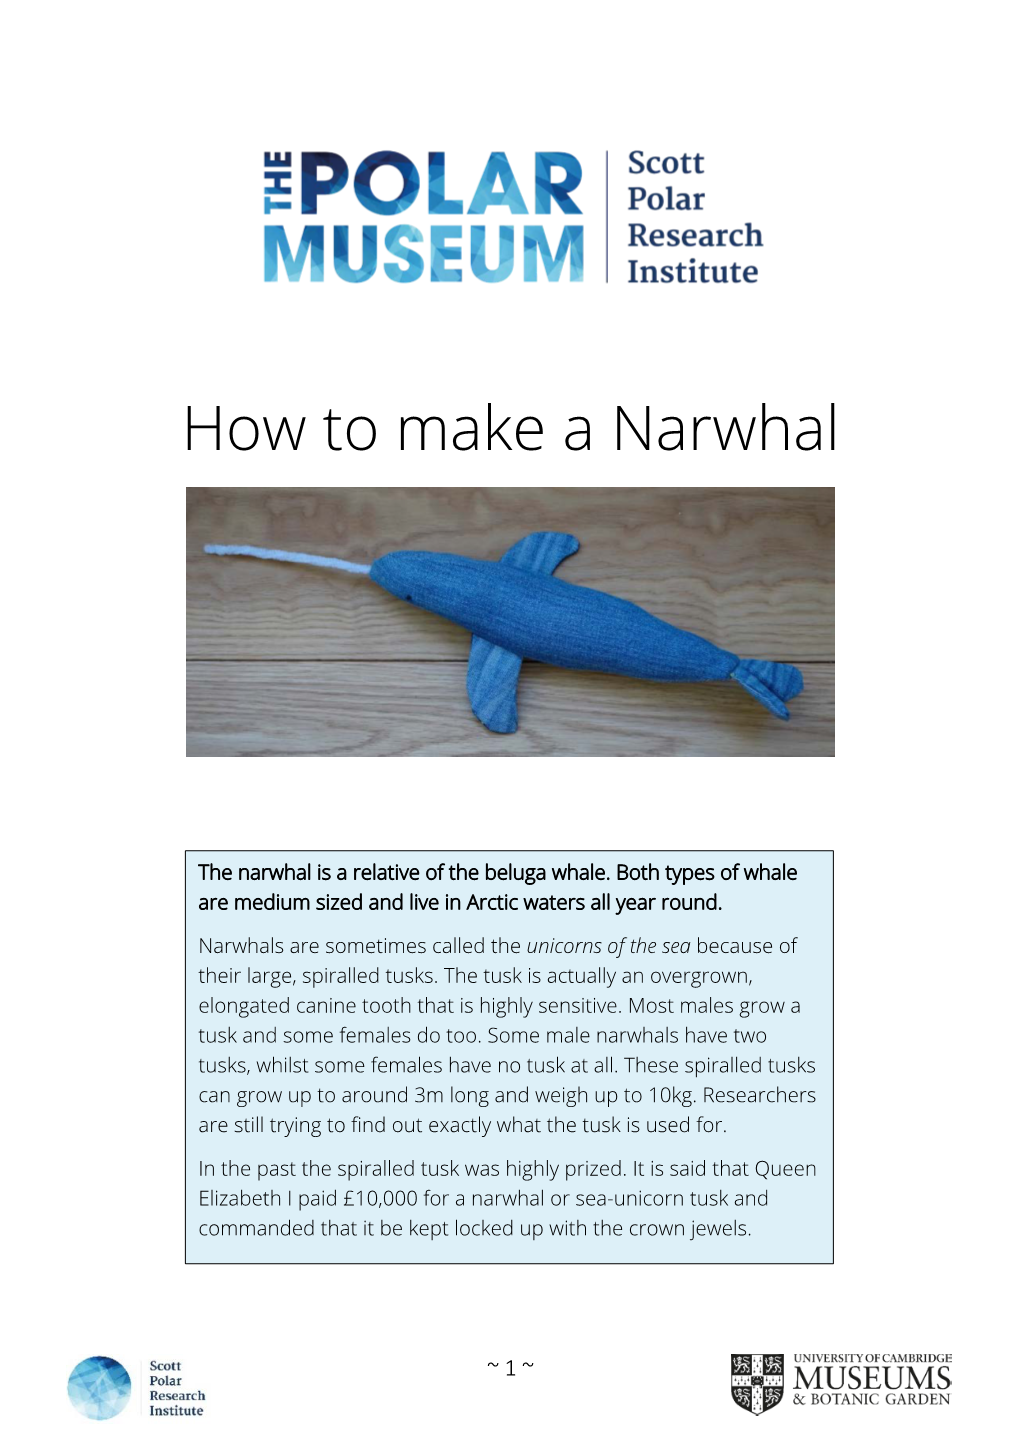 How to Make a Narwhal